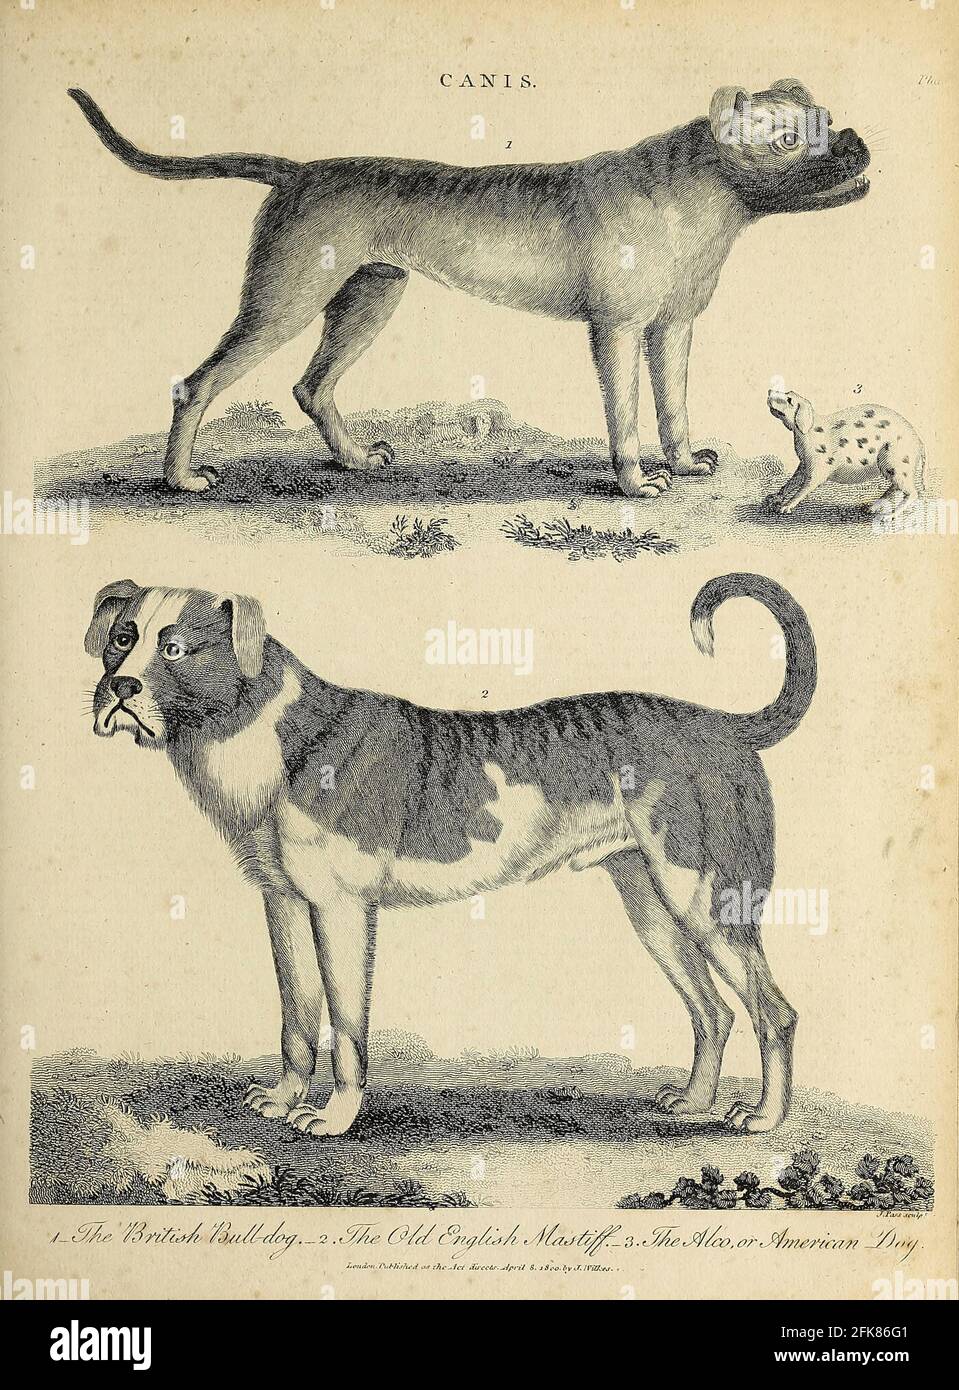 Canis Dog Breeds British Bulldog (Top) Old English Mastiff (Bottom) The Alco or American Dog (Right) Copperplate engraving From the Encyclopaedia Londinensis or, Universal dictionary of arts, sciences, and literature; Volume III;  Edited by Wilkes, John. Published in London in 1810 Stock Photo